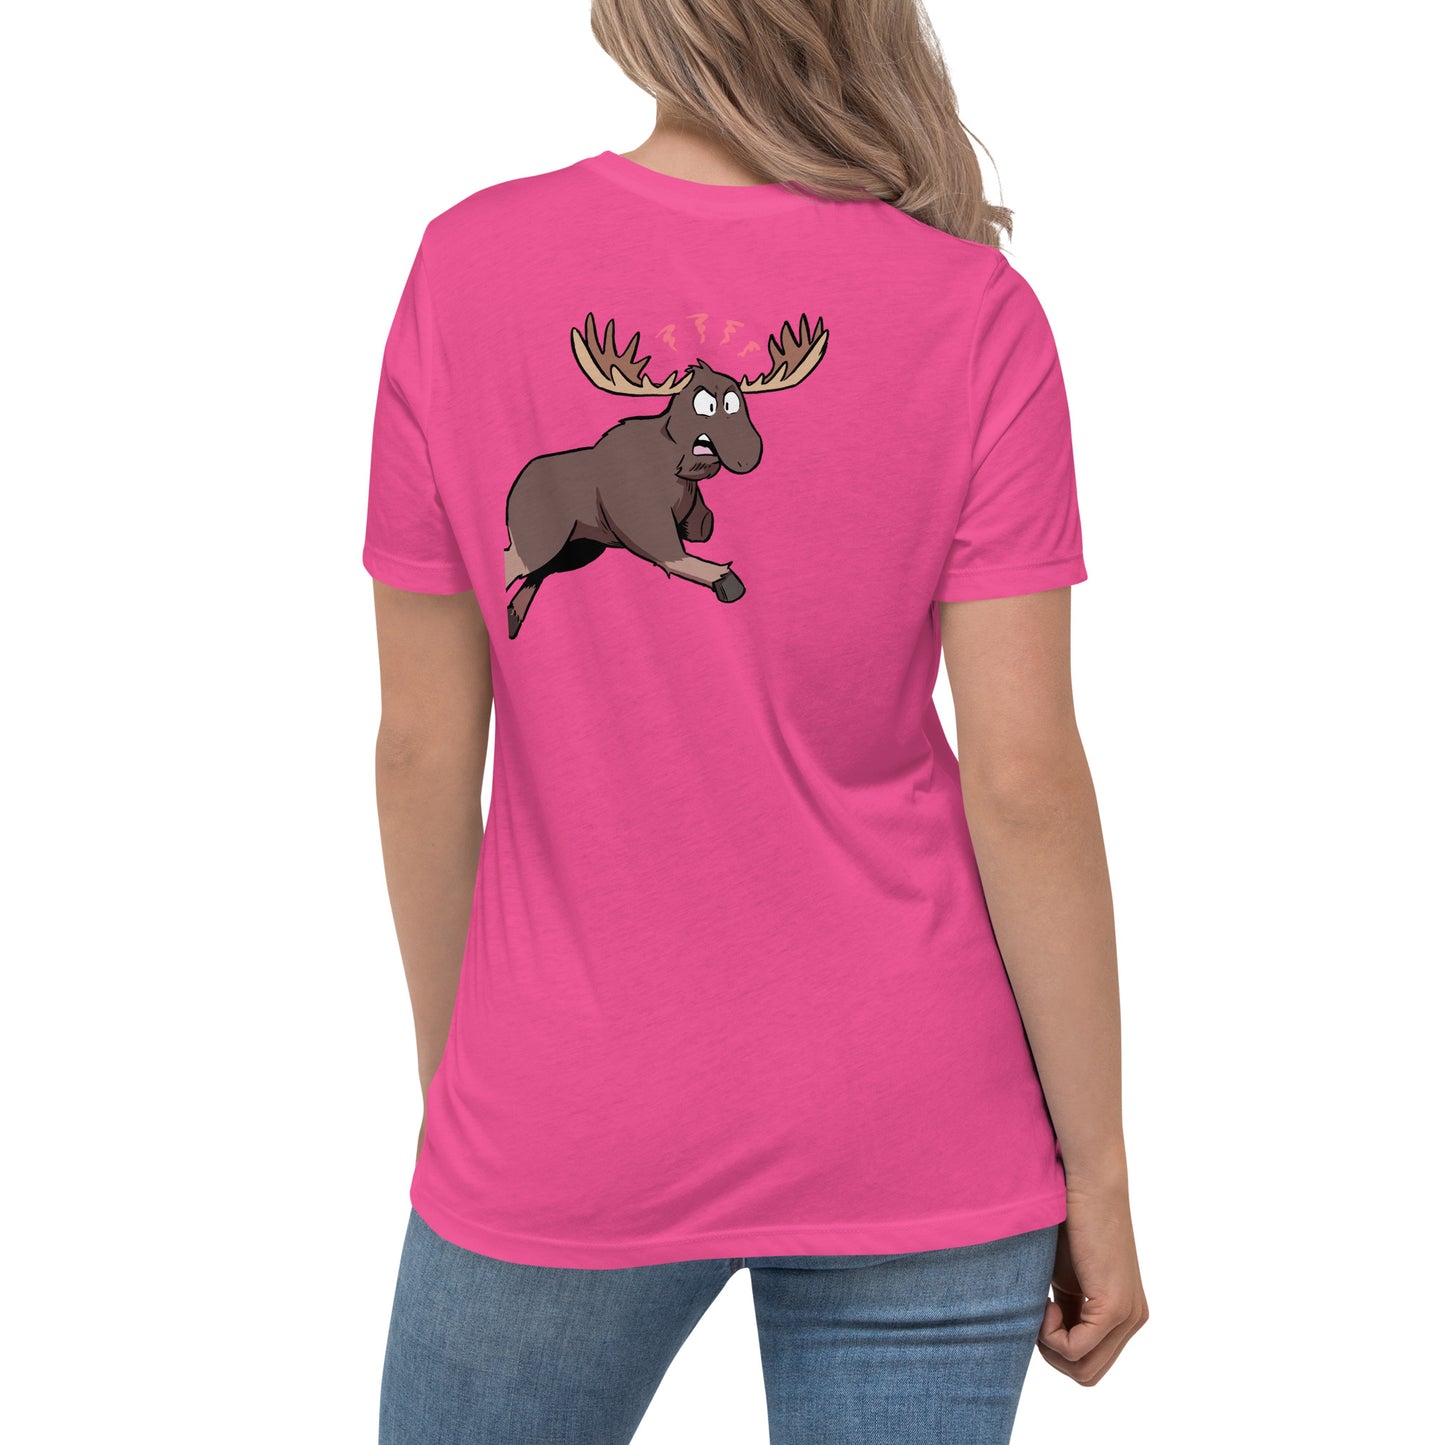 Women's Relaxed T-Shirt: That's Not Your Leg Chase Version!